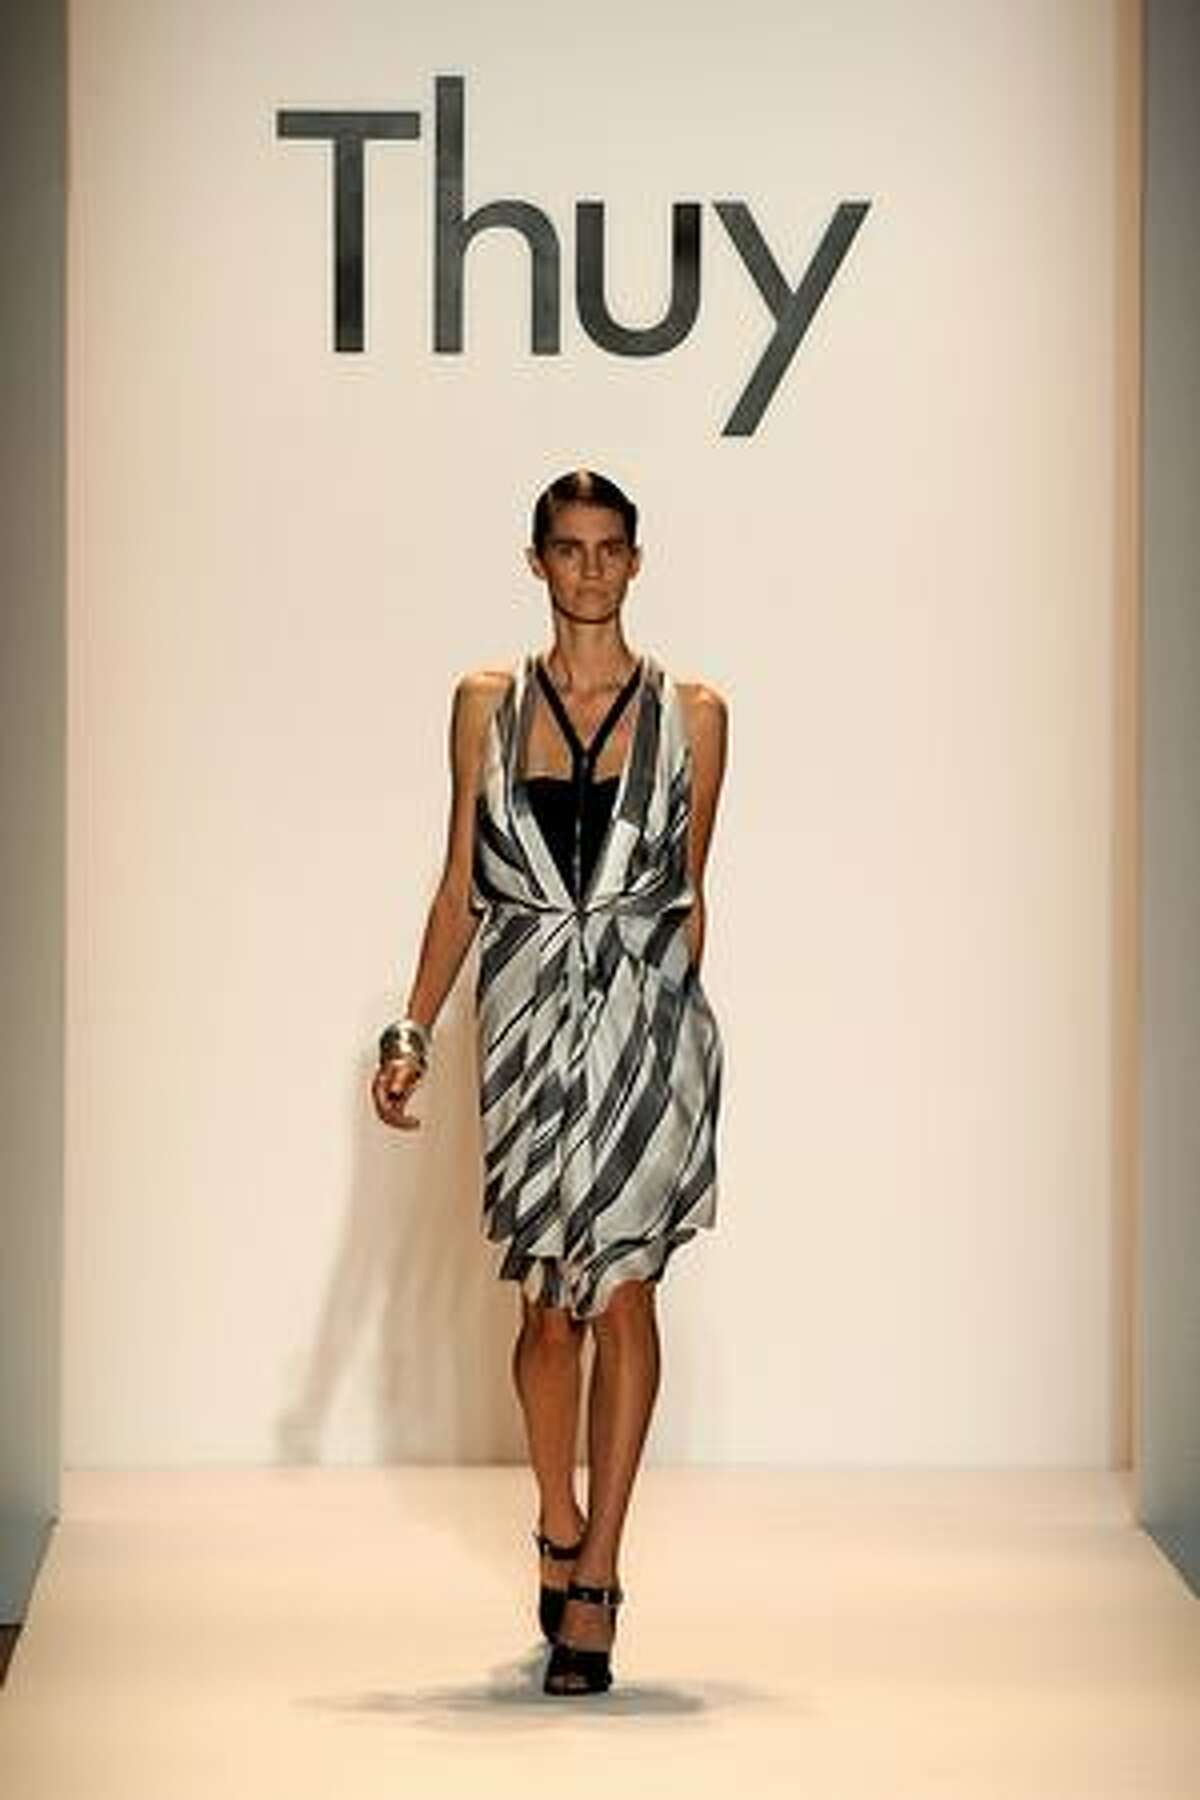 A model walks the runway at the Thuy Spring 2010 Fashion Show at the Salon at Bryant Park on Sunday in New York City.